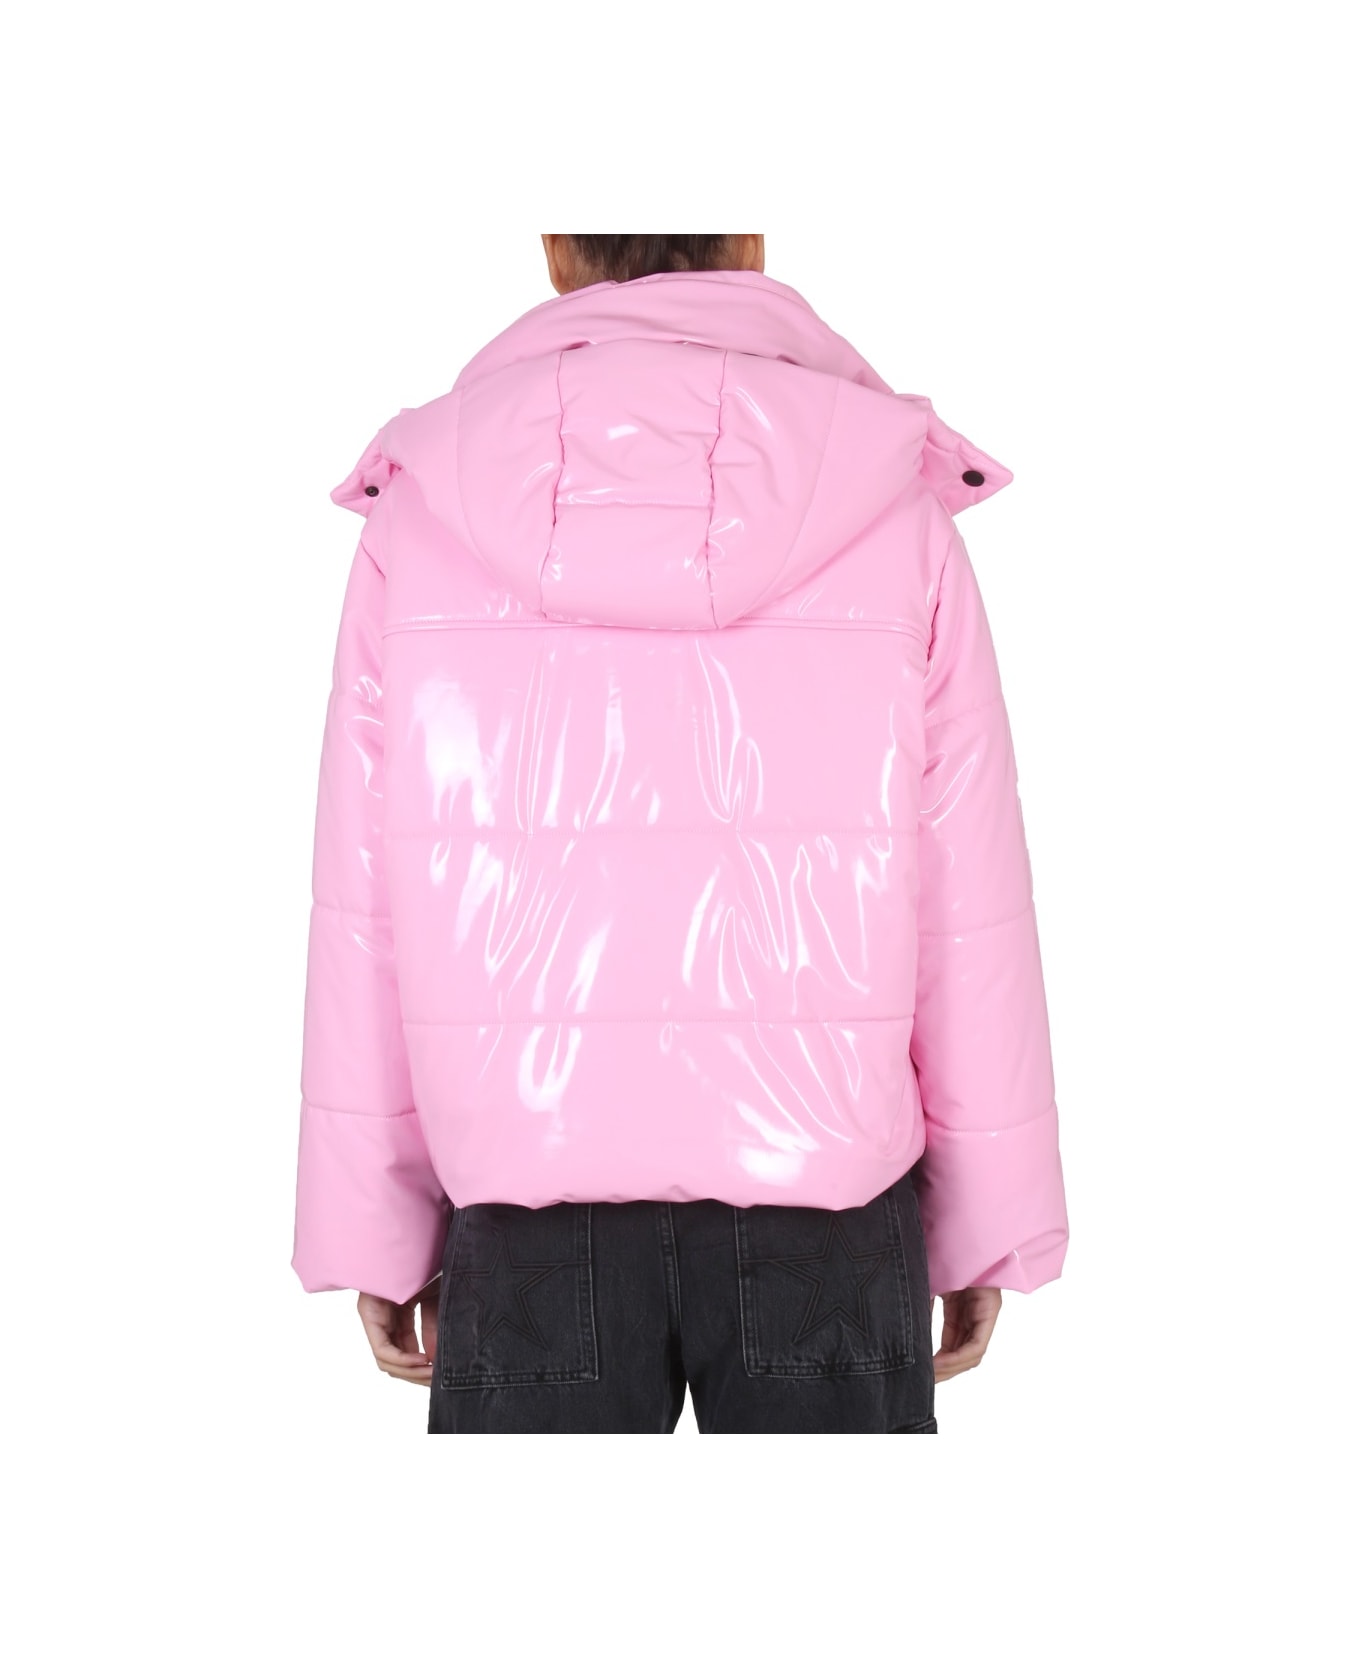 MSGM Down Jacket With Hood - PINK ジャケット